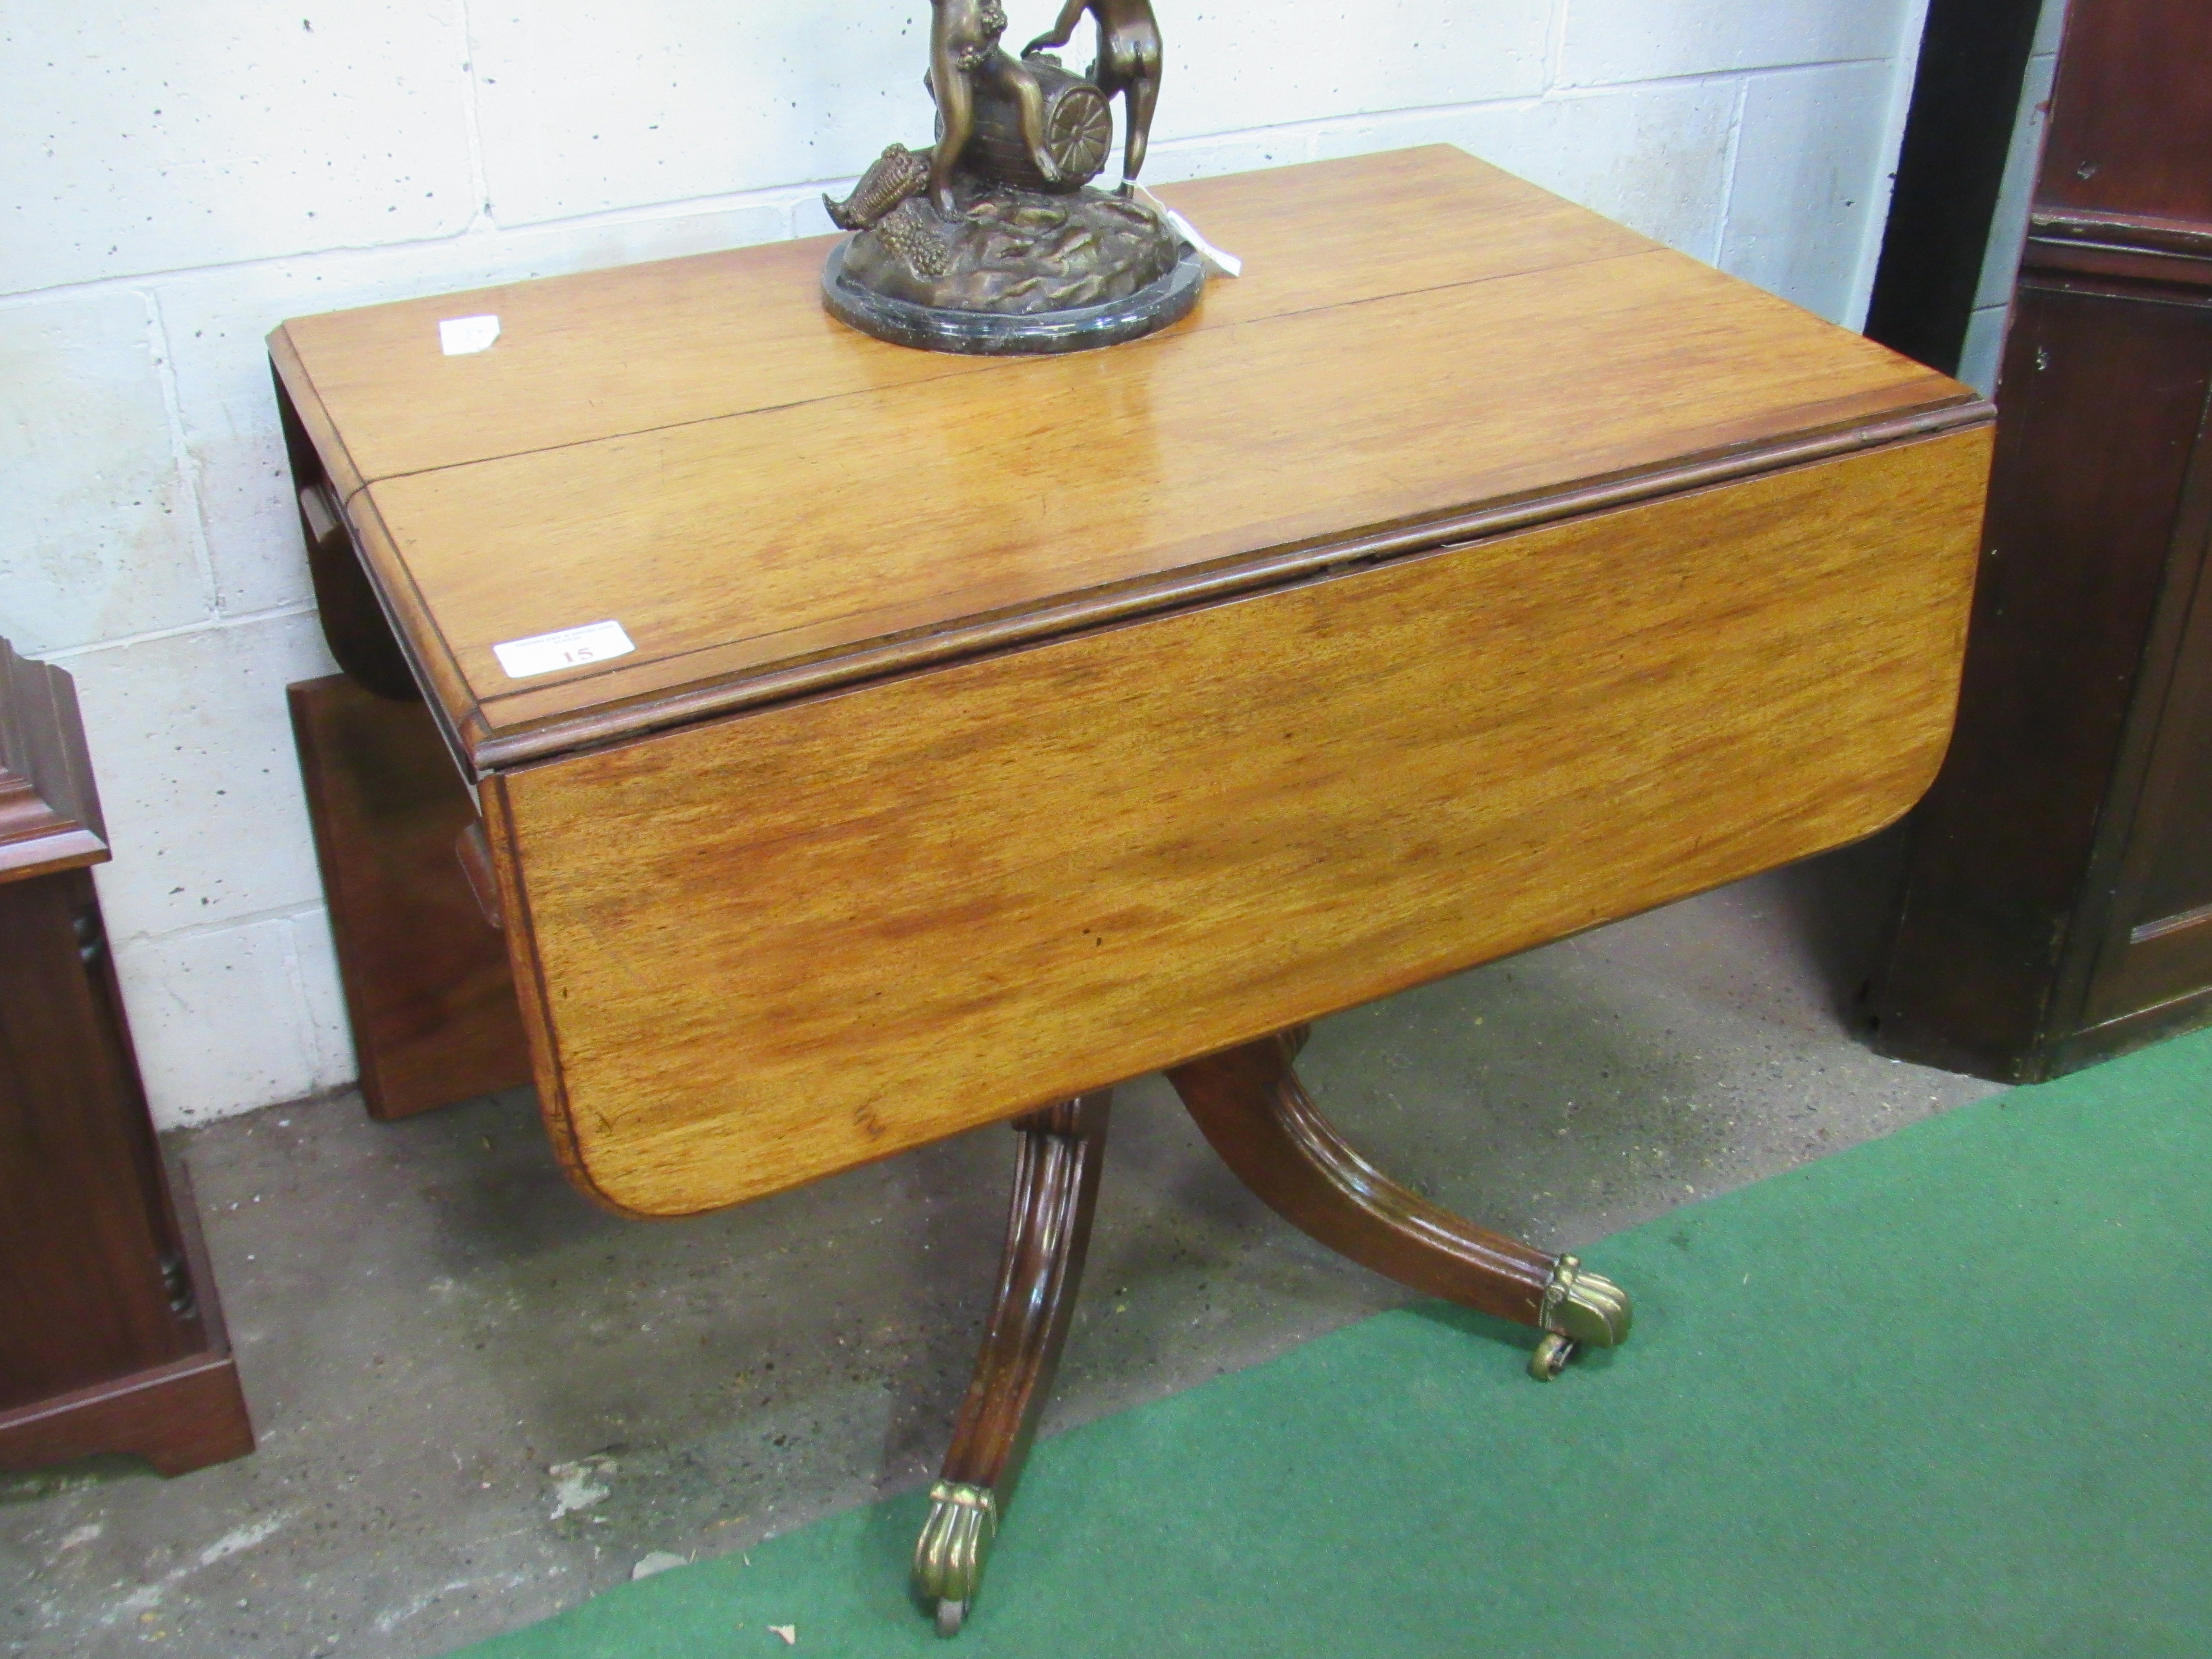 Victorian Mahogany extendable pedestal drop-side table, complete with leaf, 120(open) x 96 x